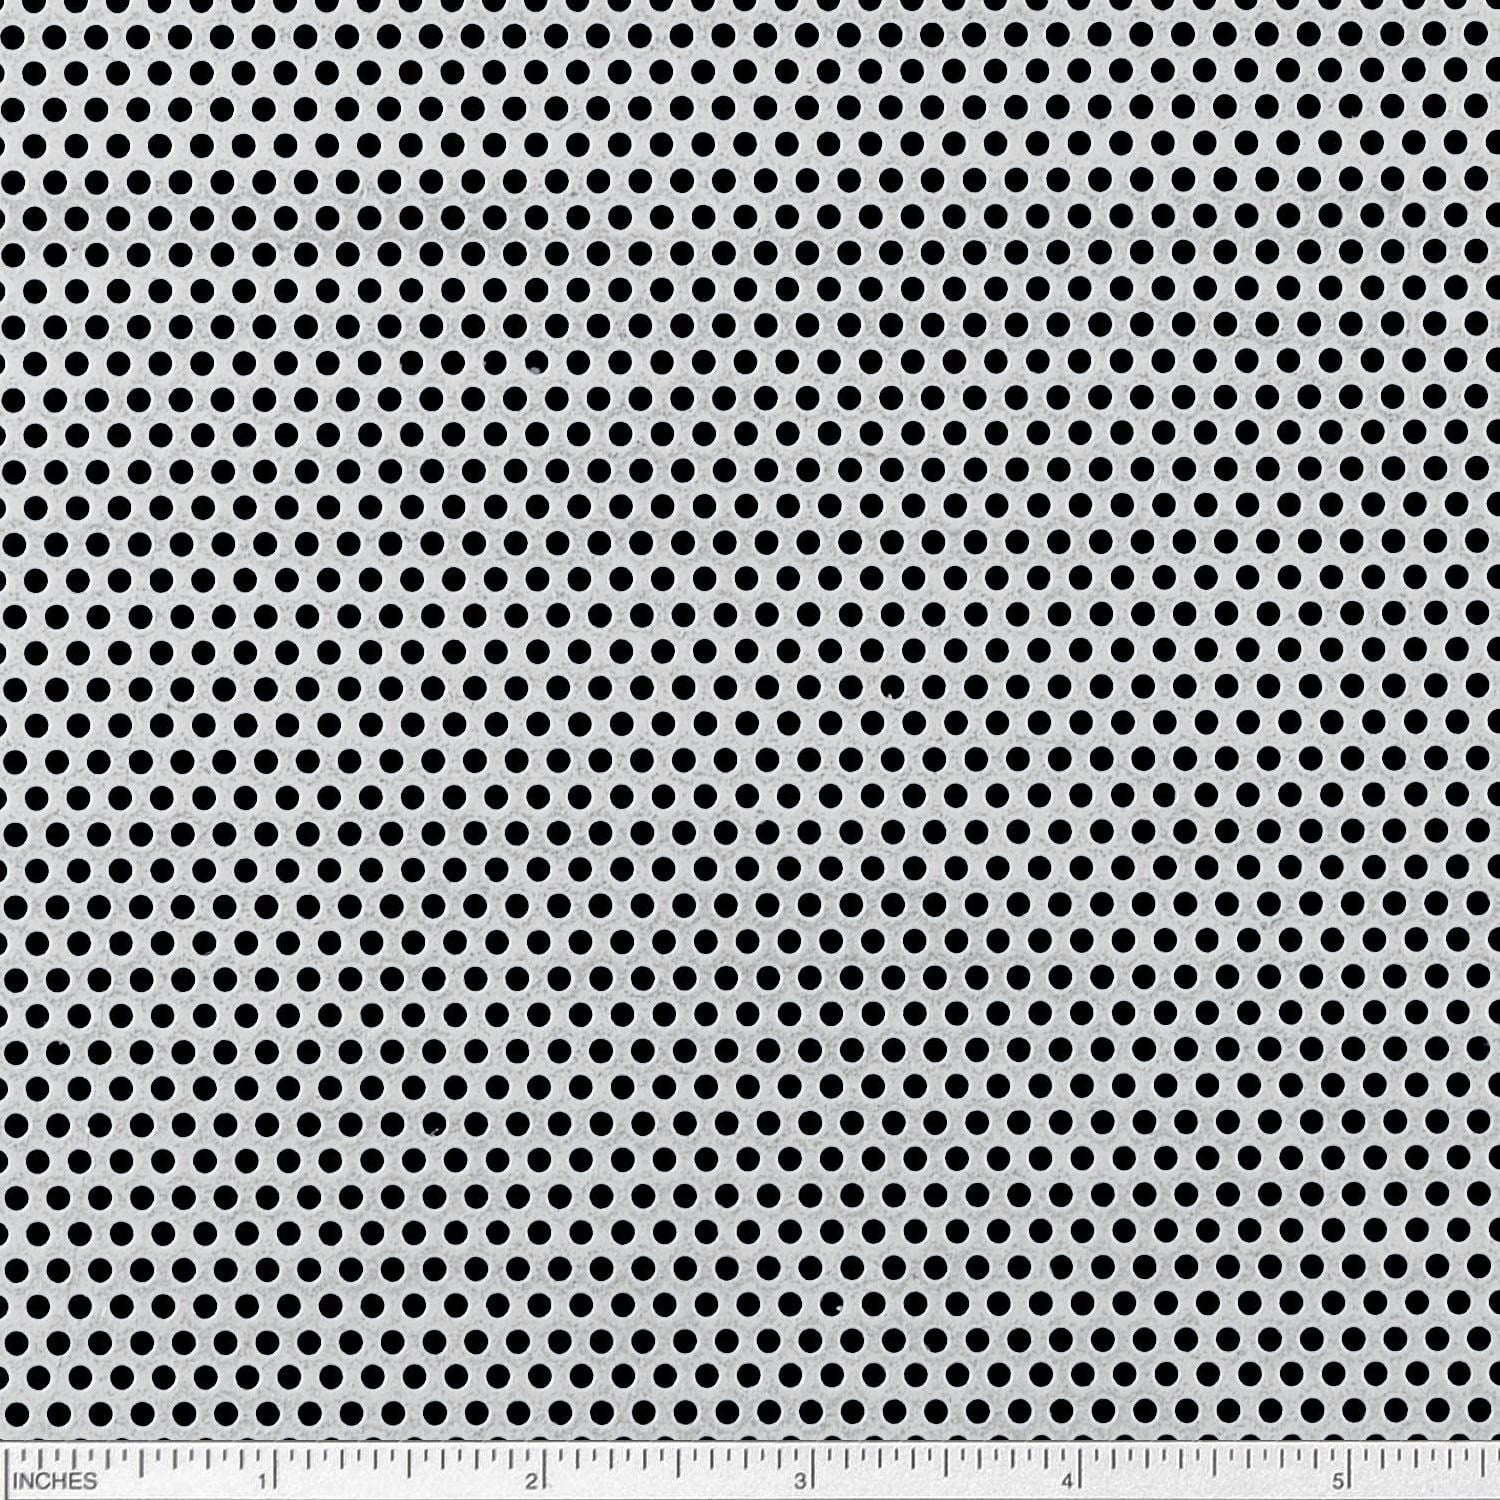 0.6875 Center to Center Mill Staggered 0.5 Holes Finish 304 Stainless Steel Perforated Sheet Annealed 0.12 Thickness Unpolished 12 Width 11 Gauge 12 Length 